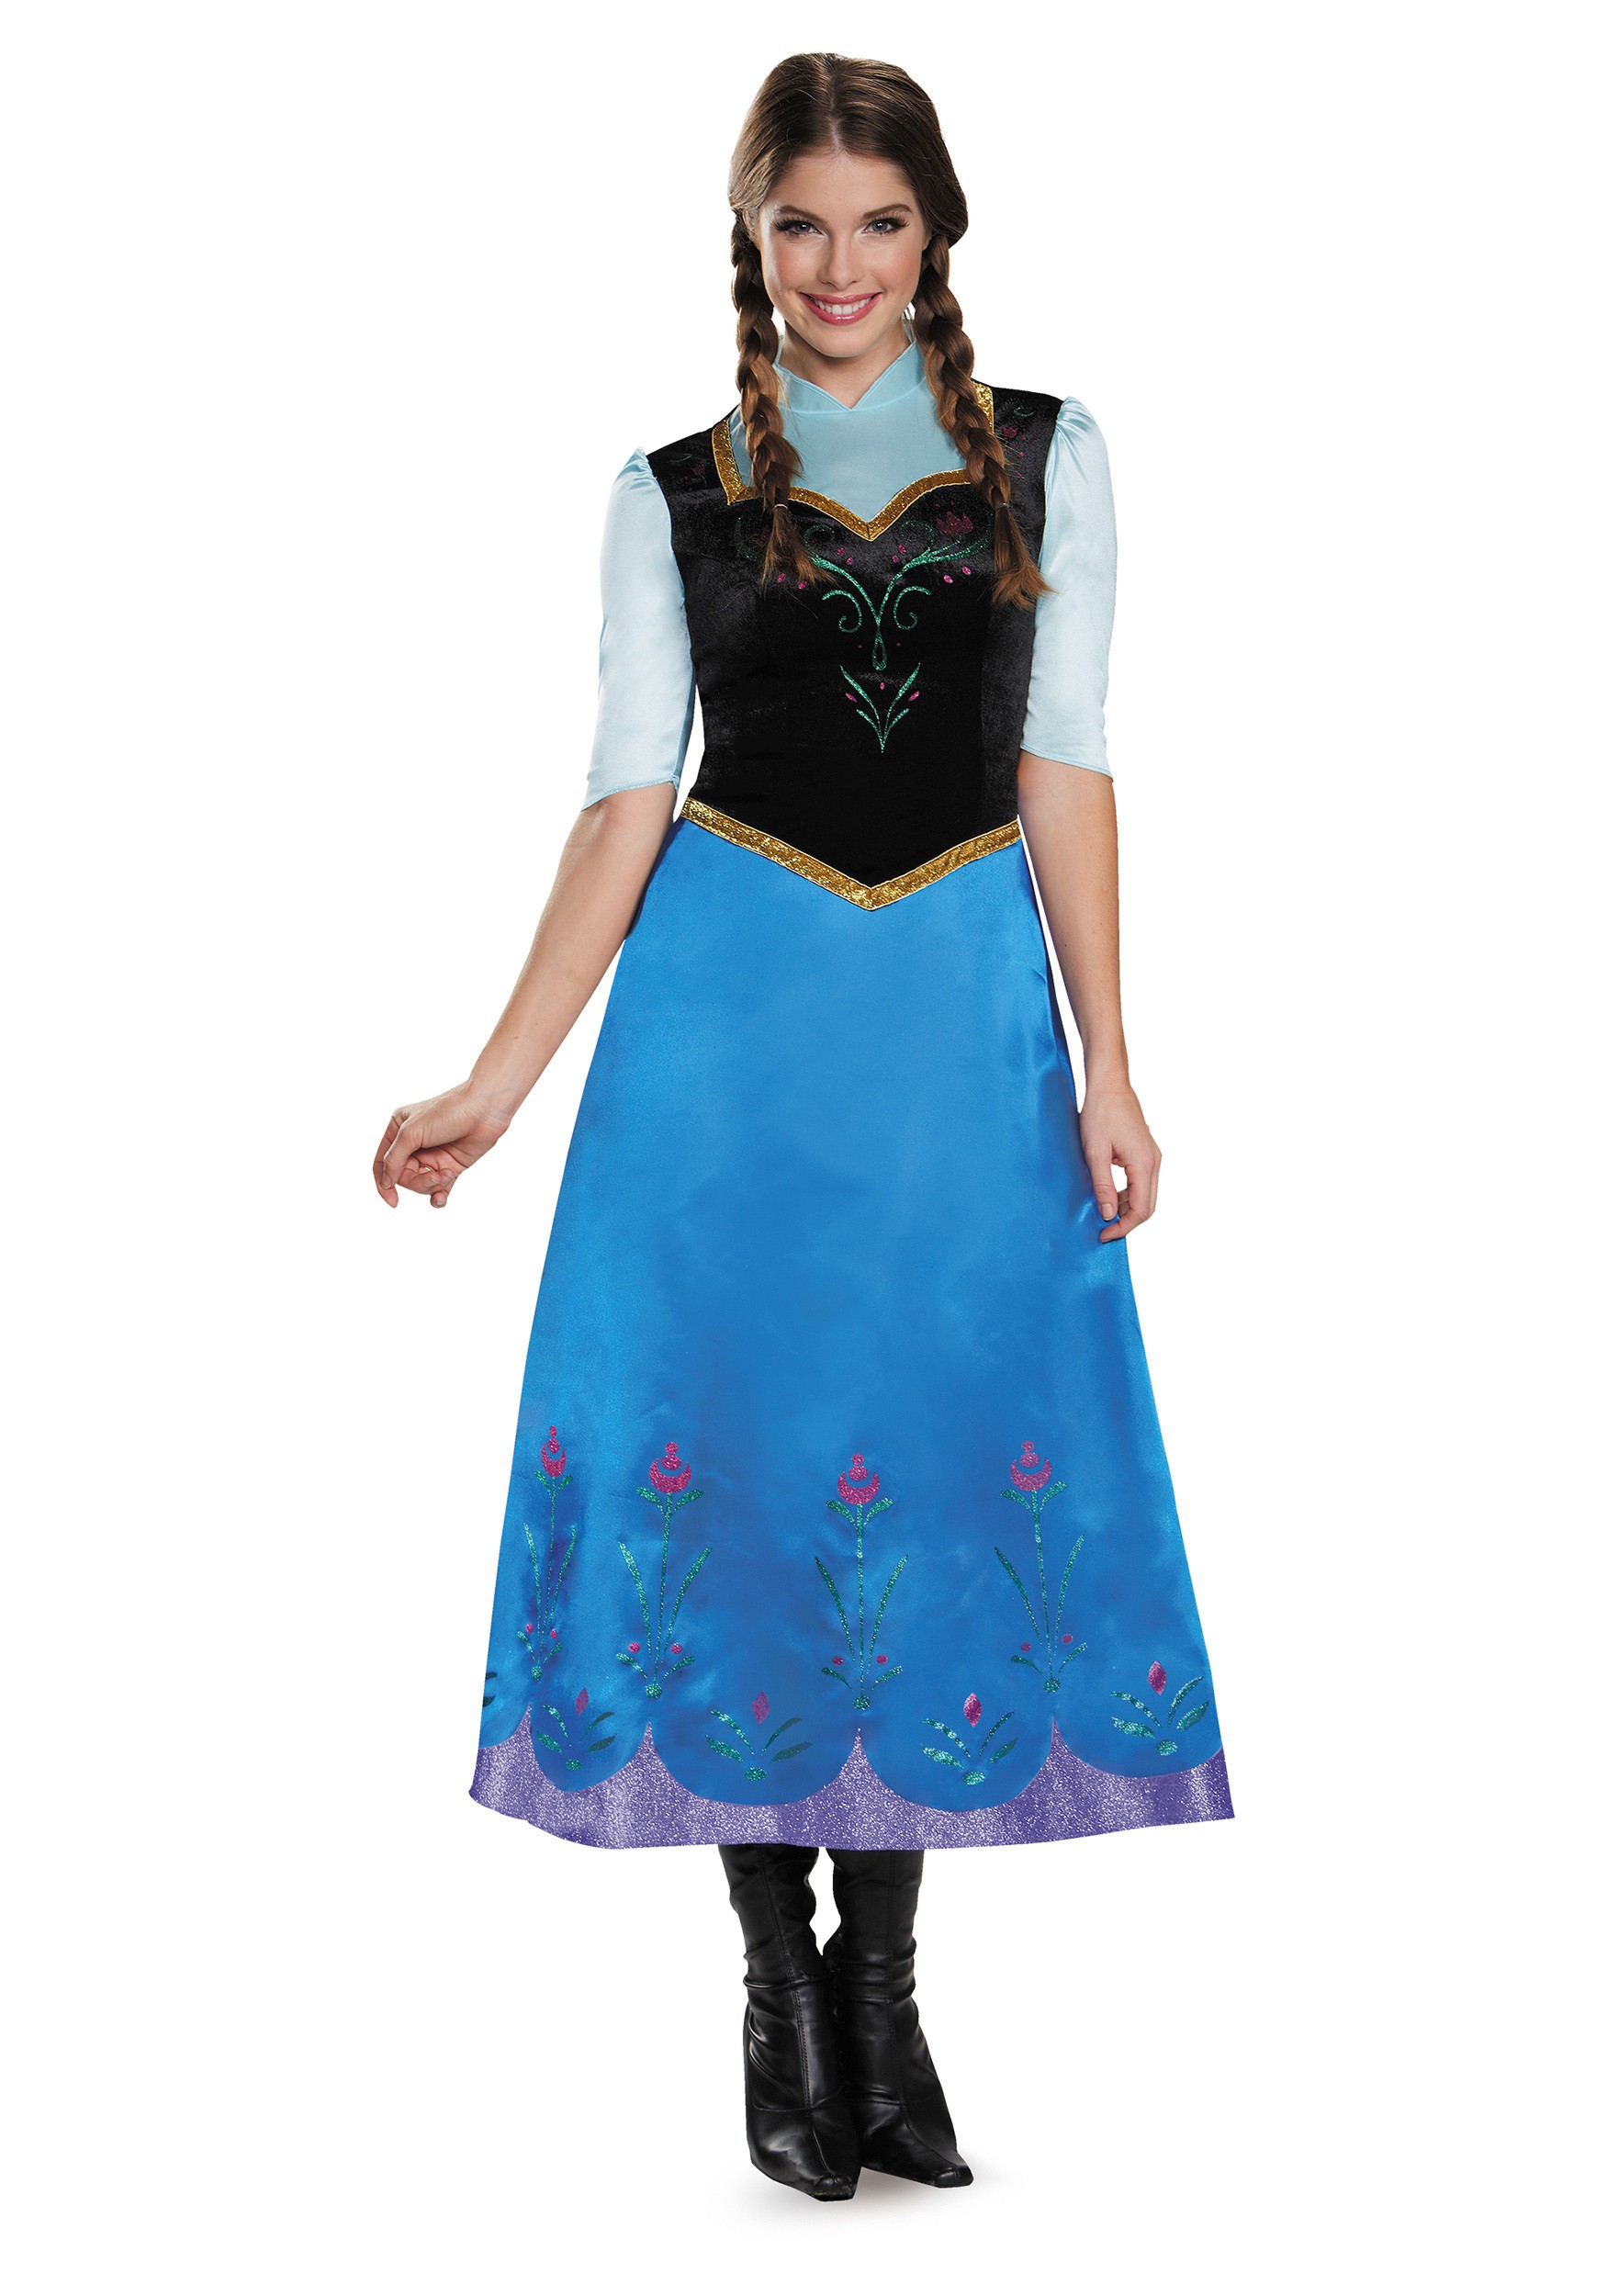 Image of Frozen Traveling Anna Deluxe Costume ID DI83151-M